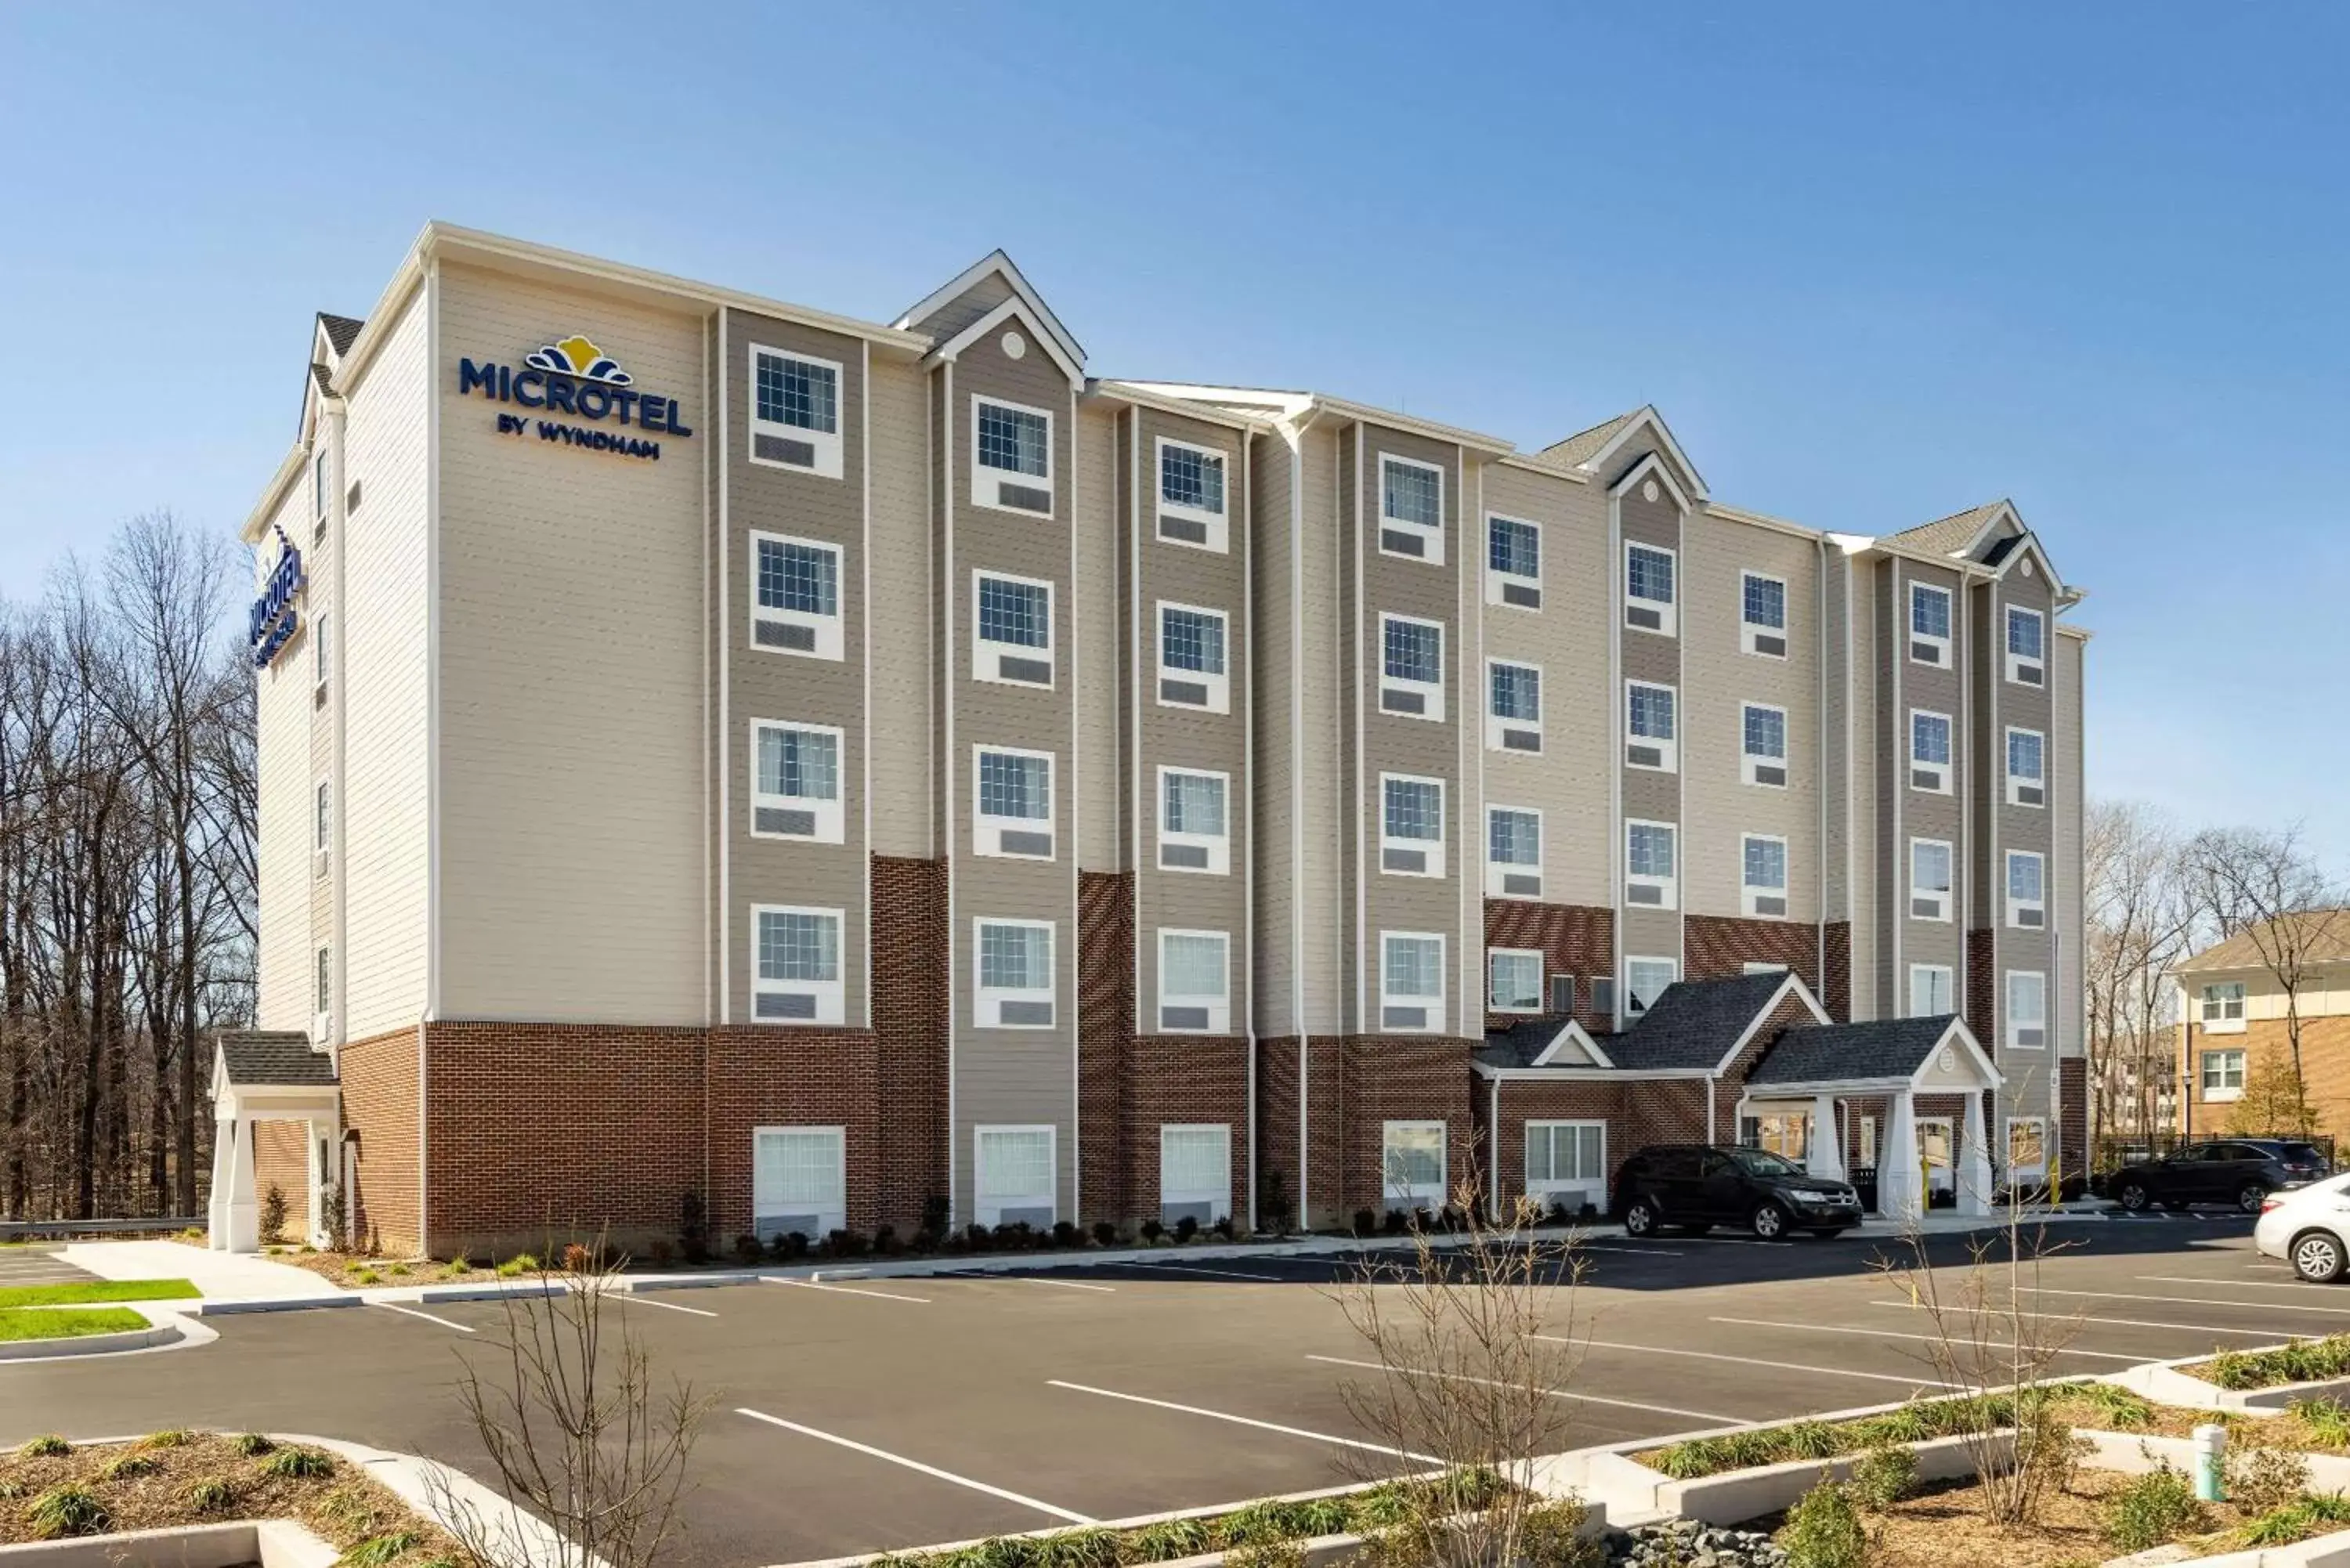 Property Building in Microtel Inn & Suites by Wyndham Gambrills